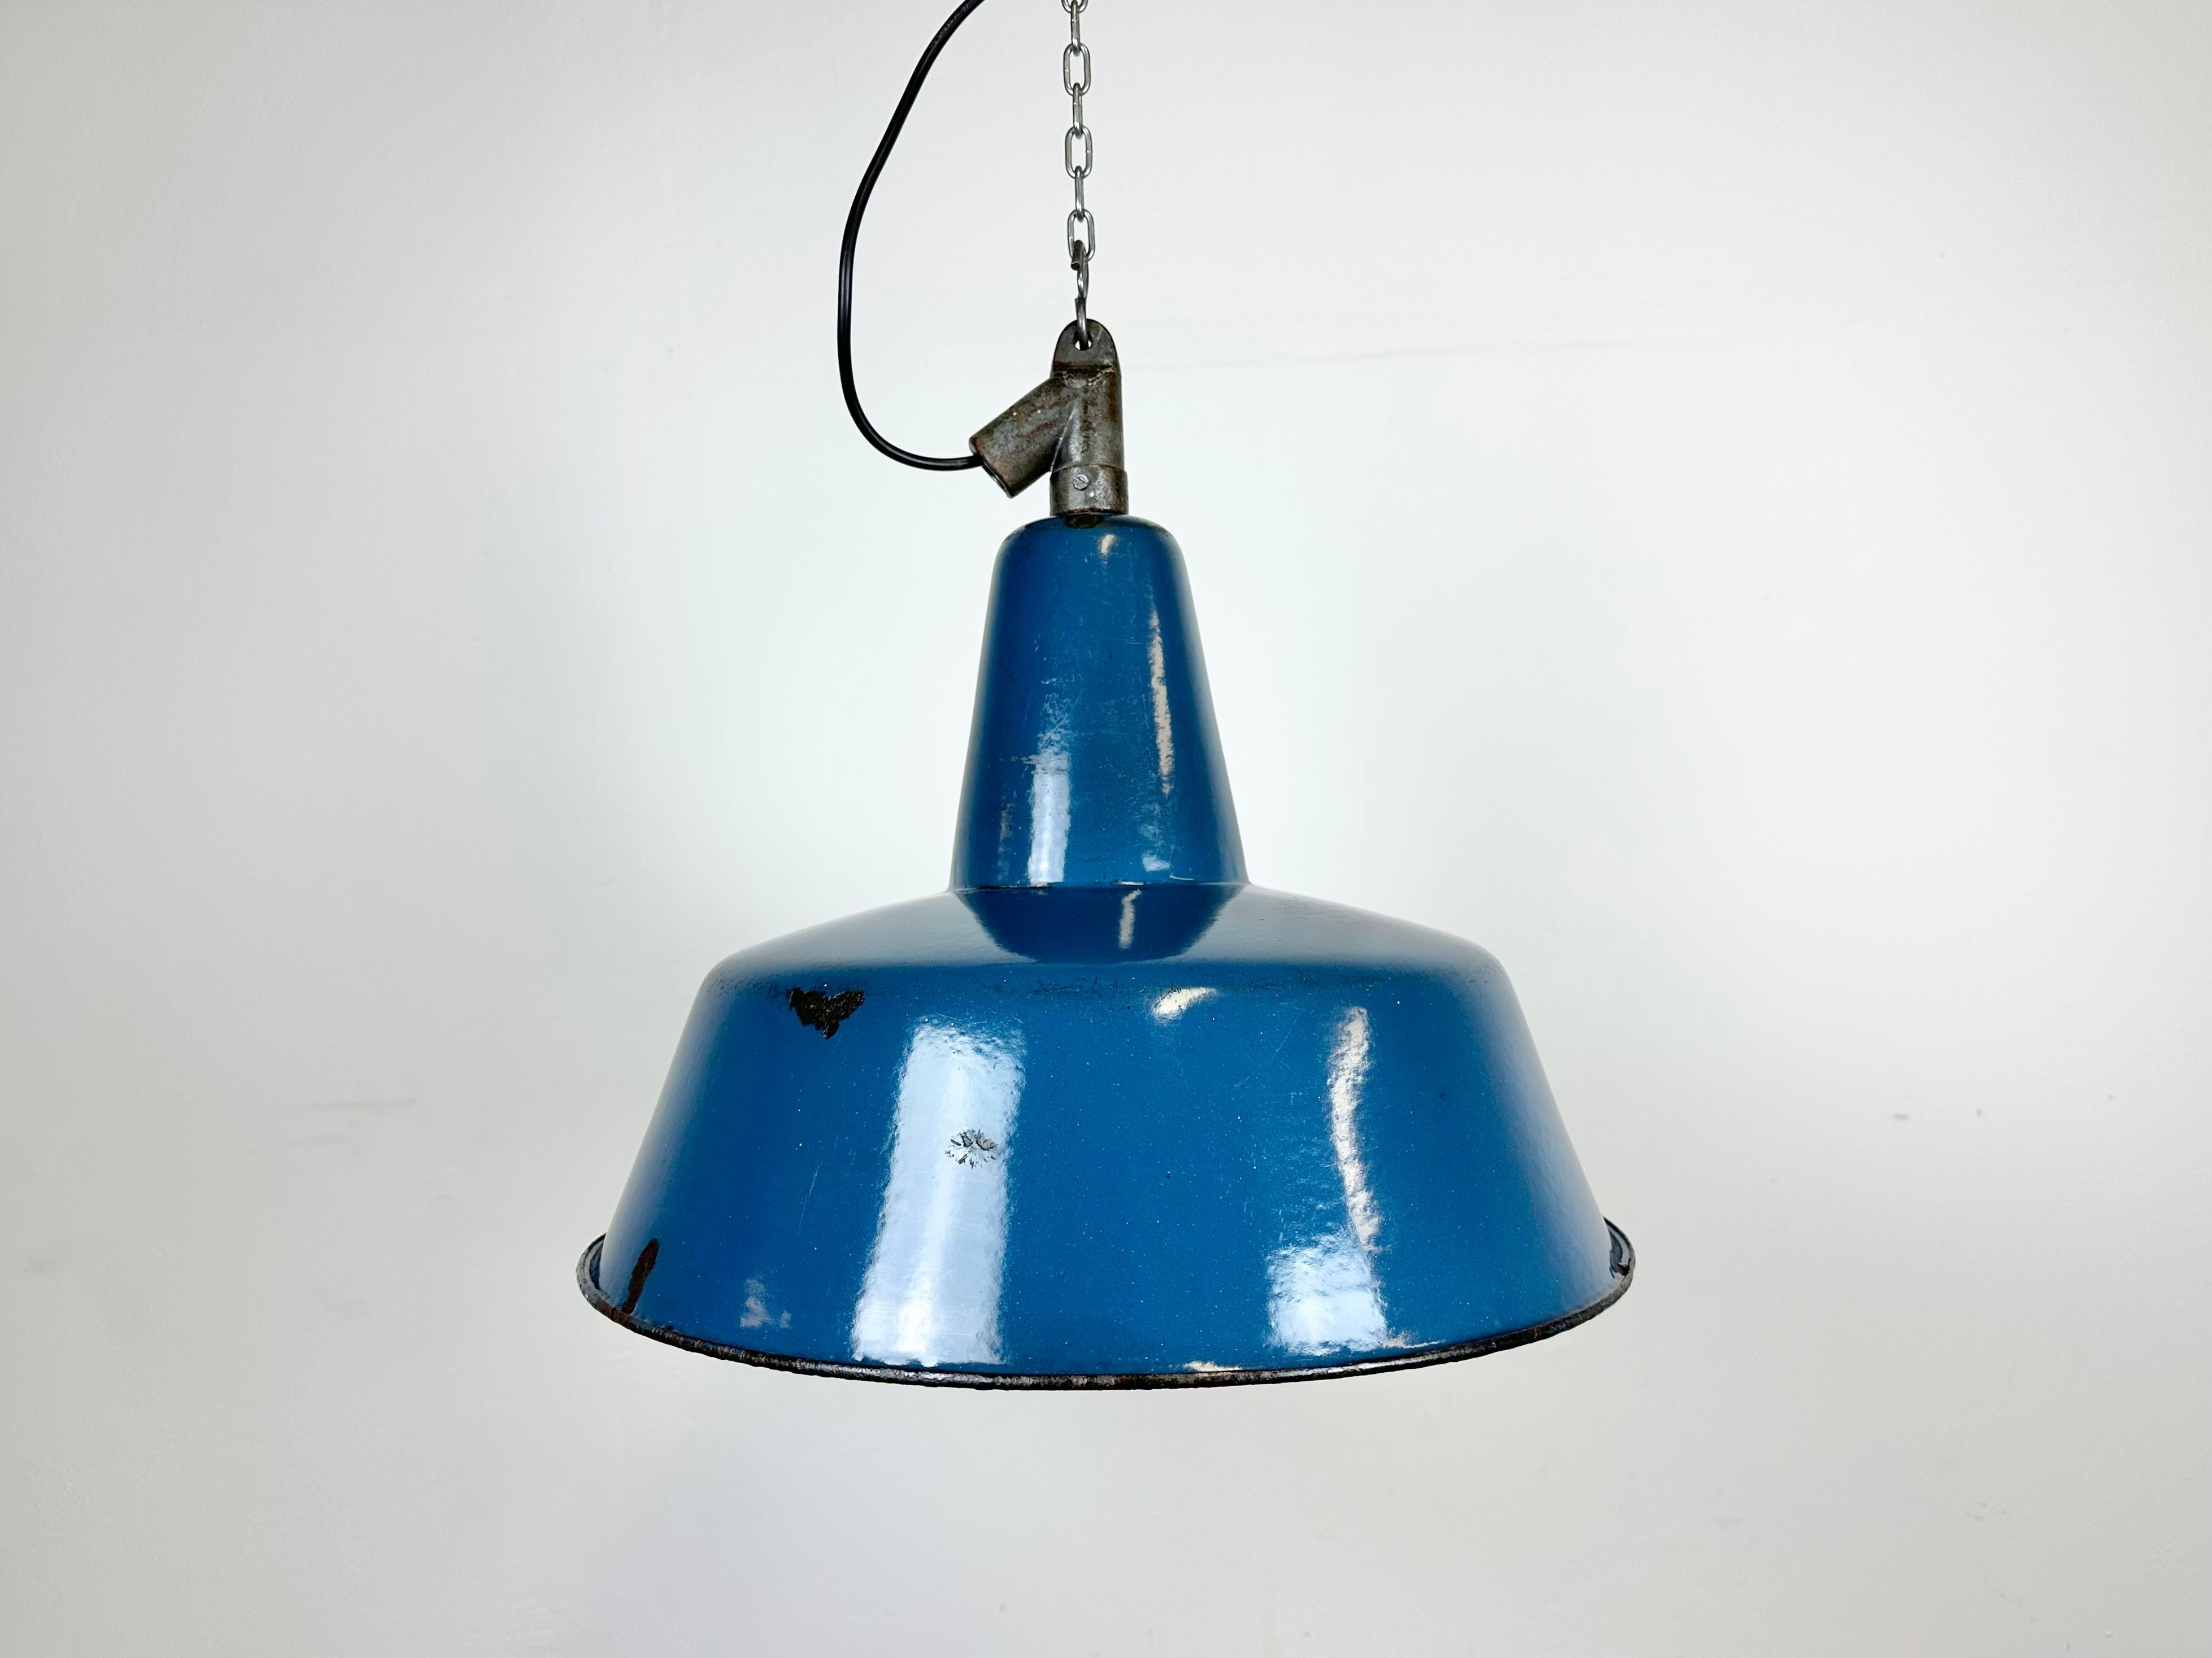 Industrial blue enamel pendant light made in Poland during the 1960s. White enamel inside the shade. Cast iron top. The porcelain socket requires E 27/ E 26 light bulbs. New wire. The weight of the lamp is 2,5 kg.